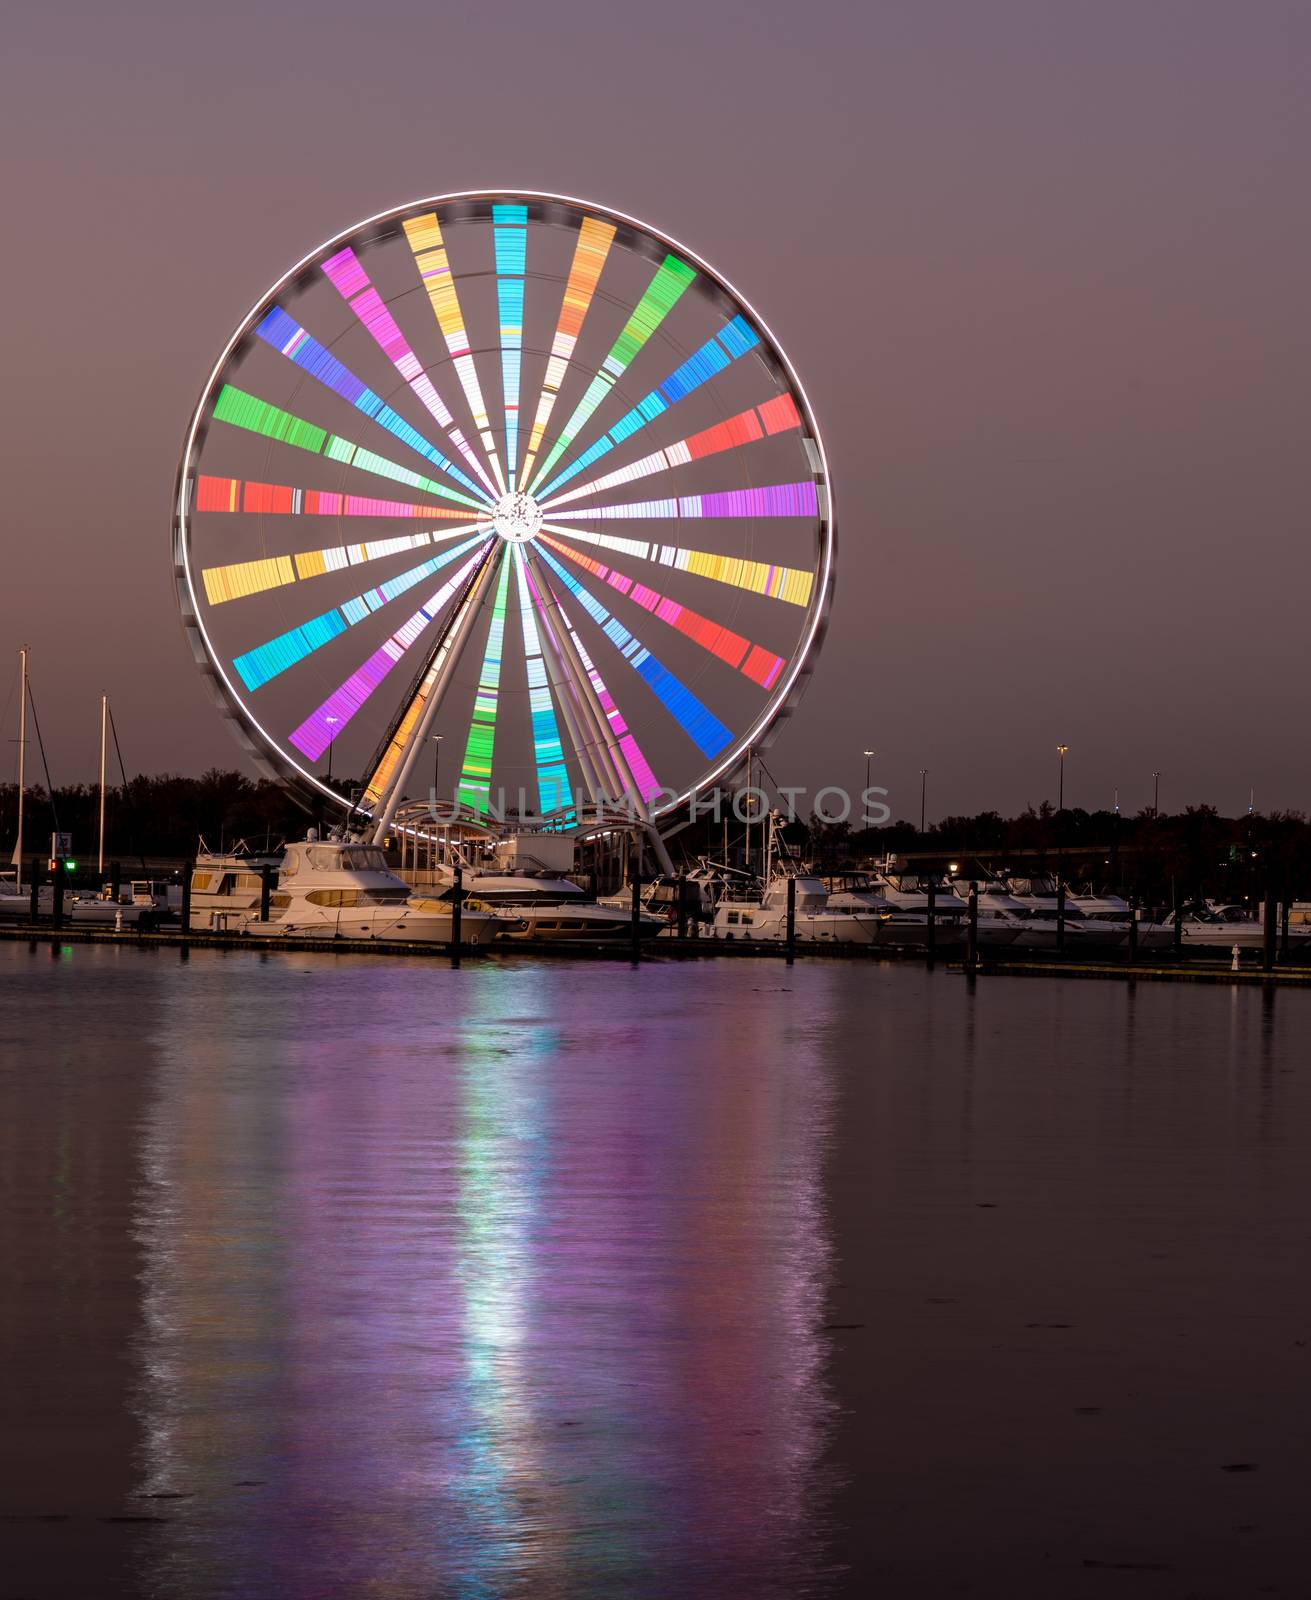 Ferris wheel at National Harbor in Maryland outside Washington DC by steheap